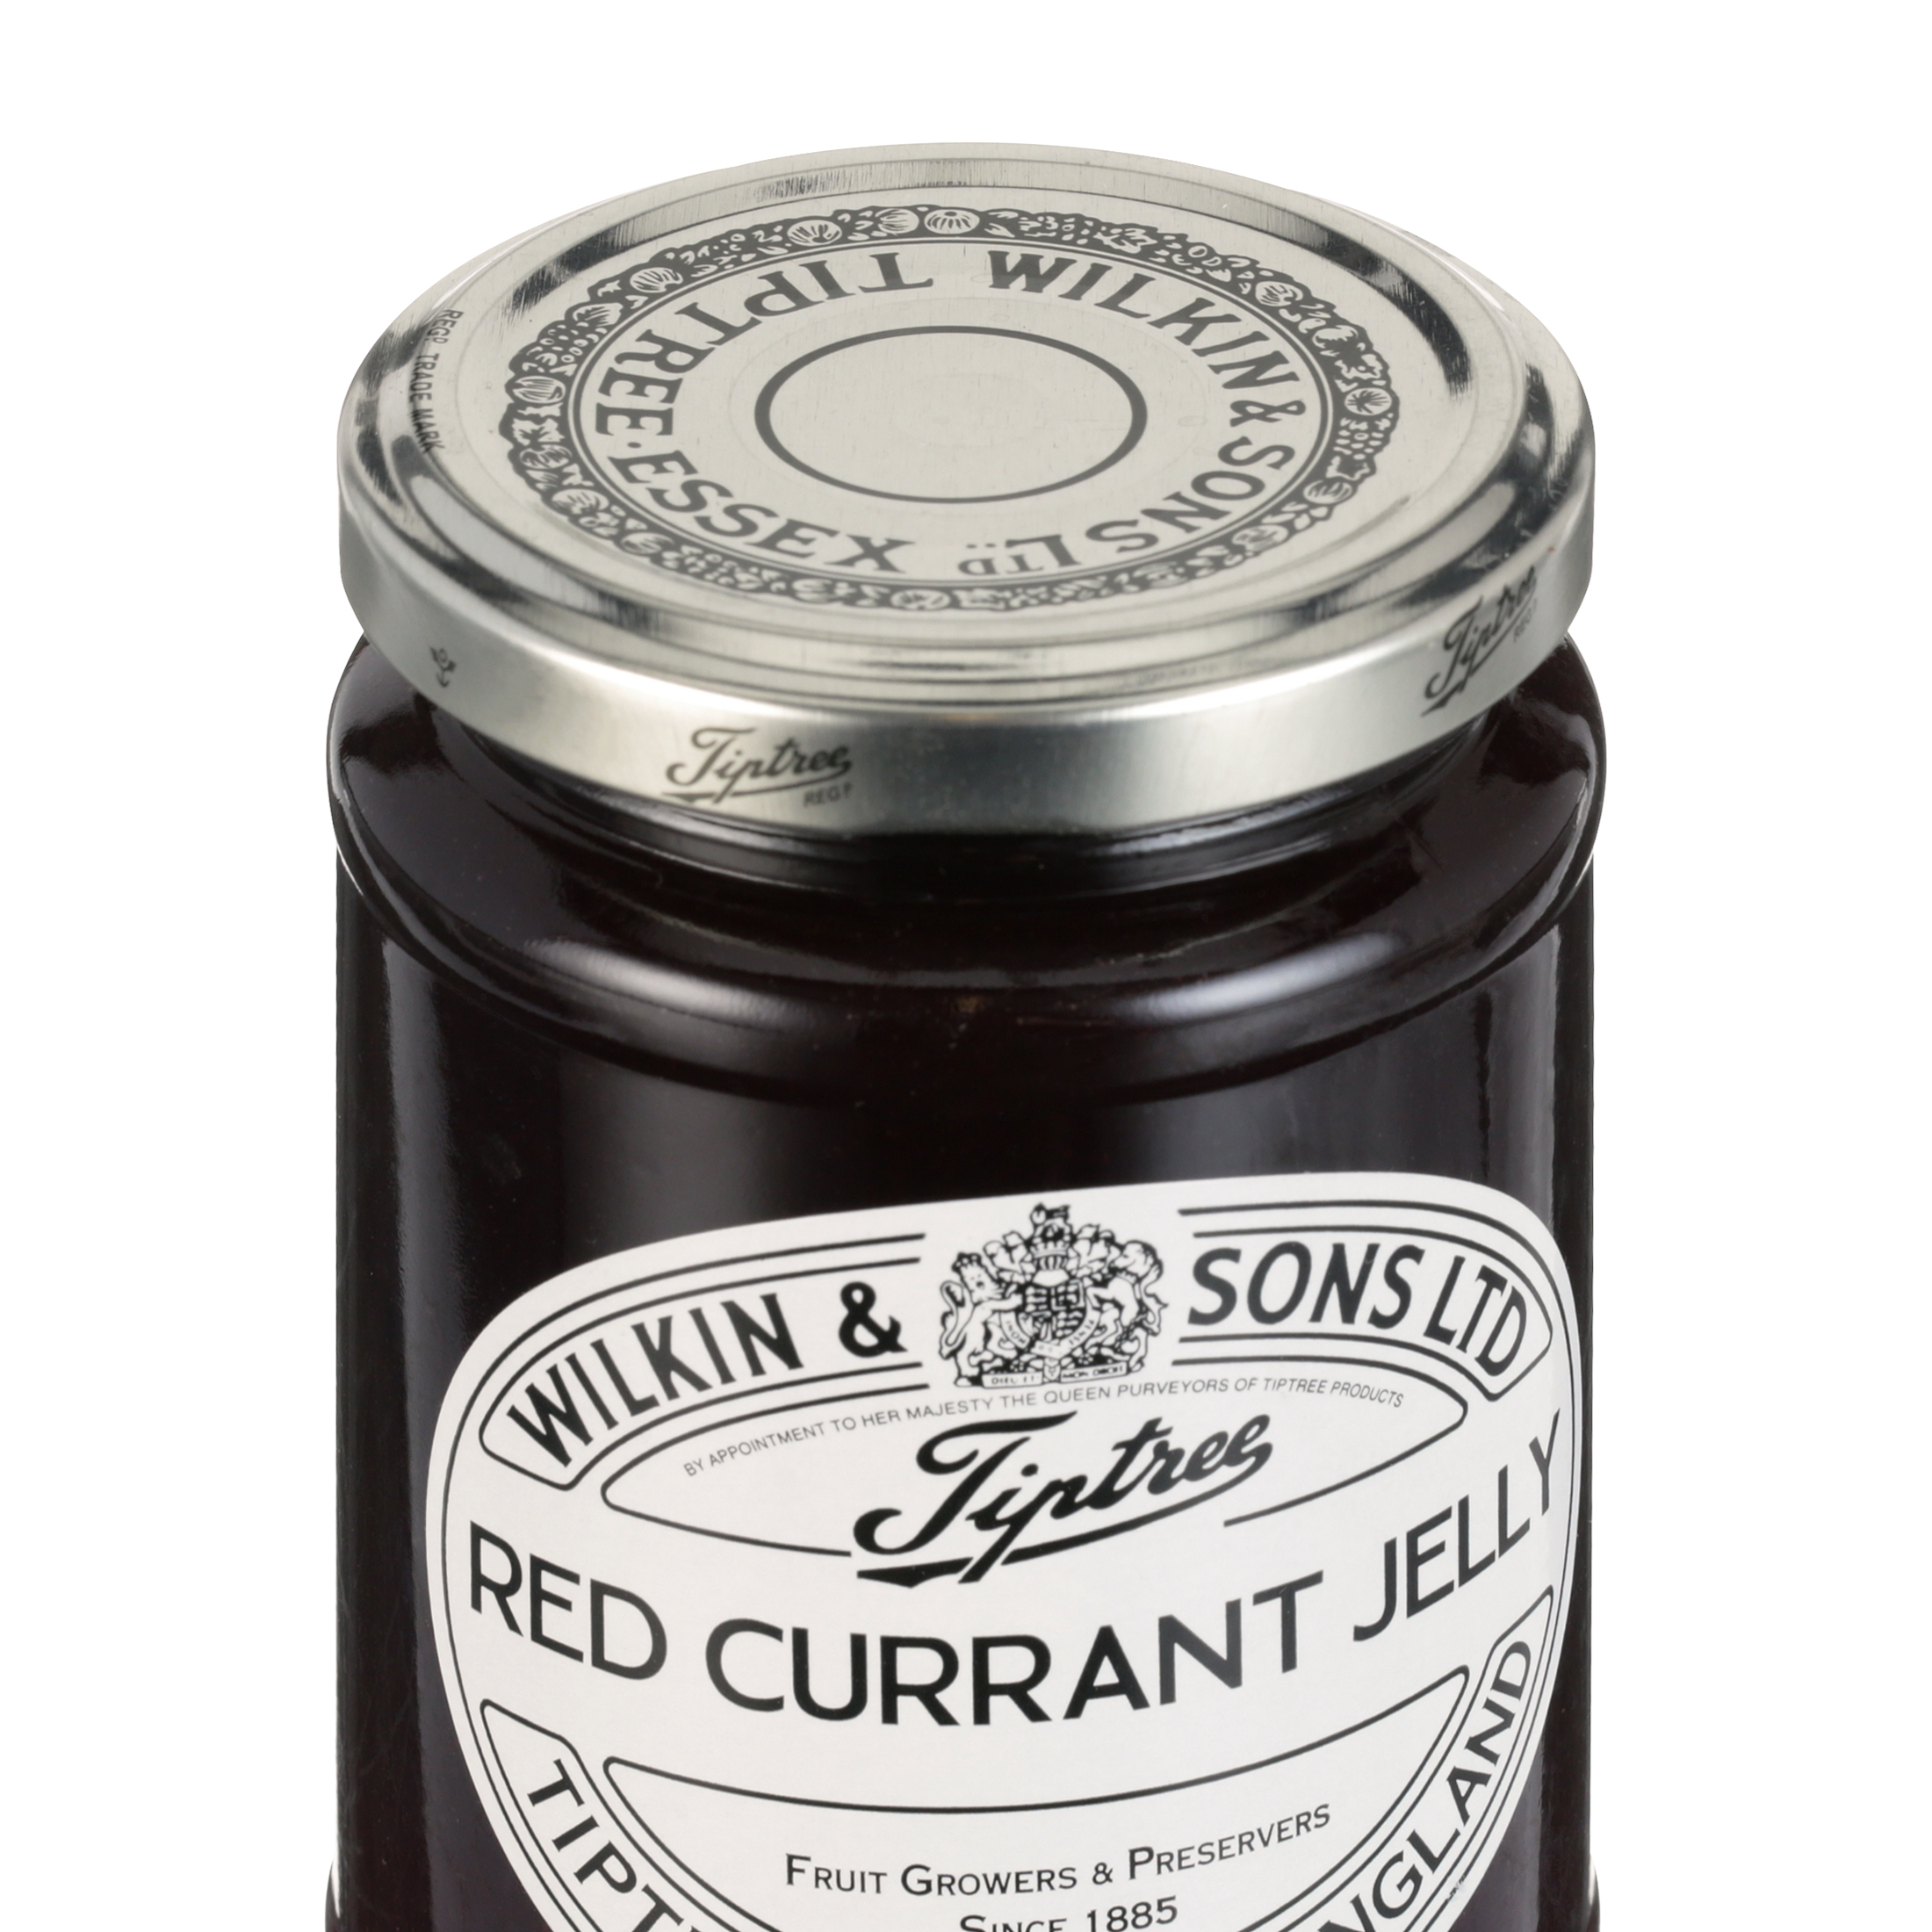 Tiptree Red Currant Jelly, 12 Ounce Jar - image 3 of 8